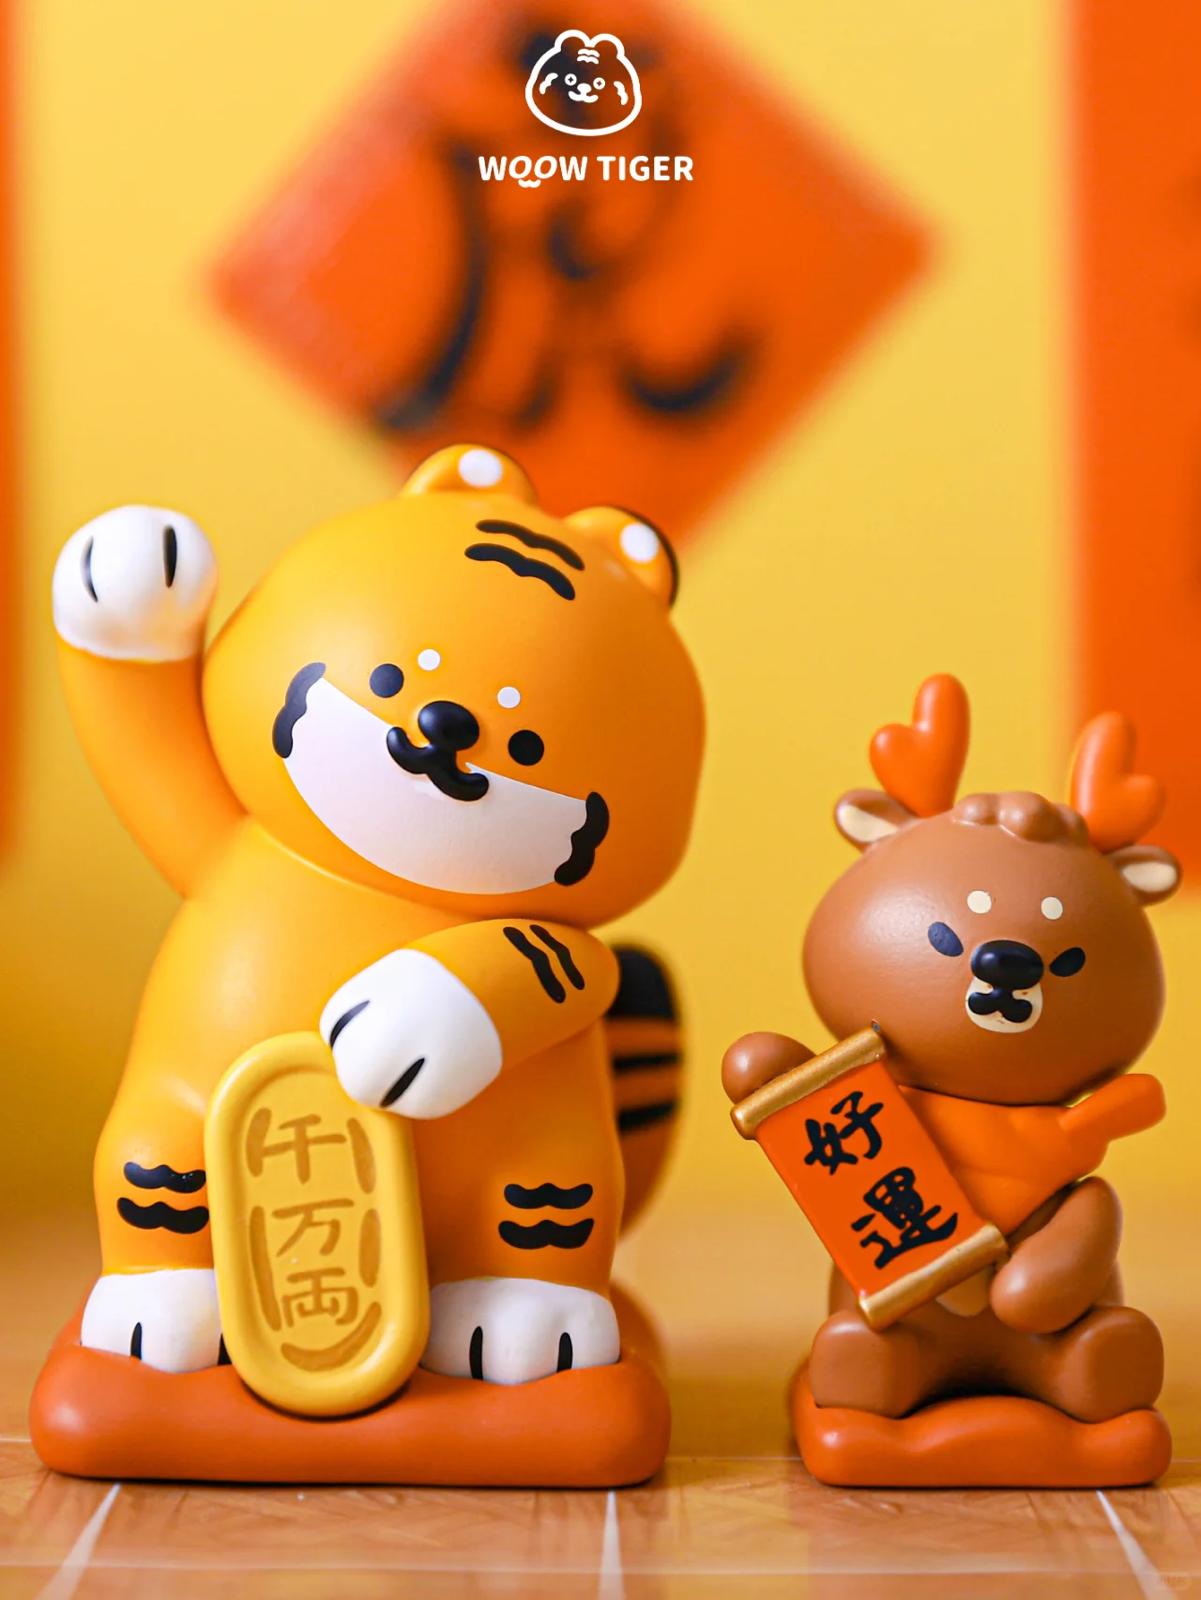 WOOW TIGER LIFE BLIND BOX